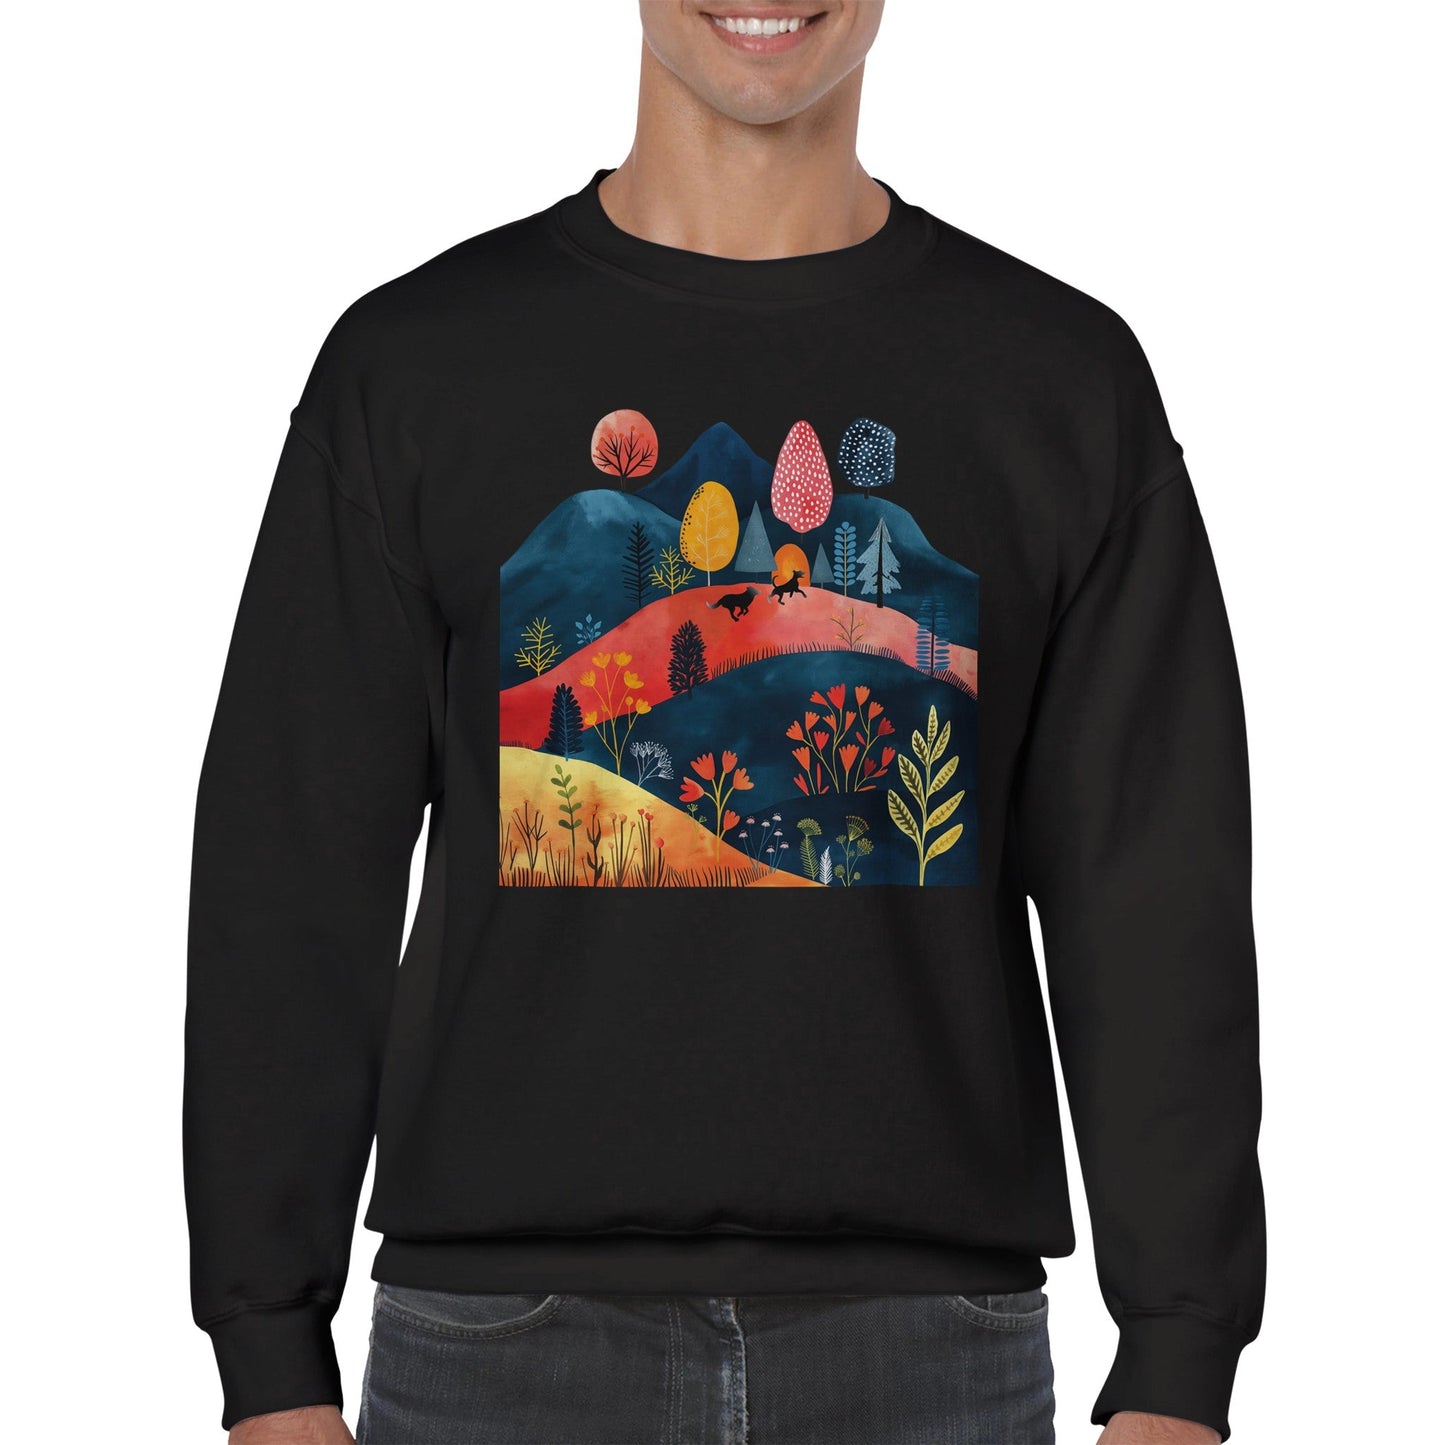 Men's Classic Crewneck Sweatshirt featuring Cottage Core Style Dogs Running Free Design - Hobbster